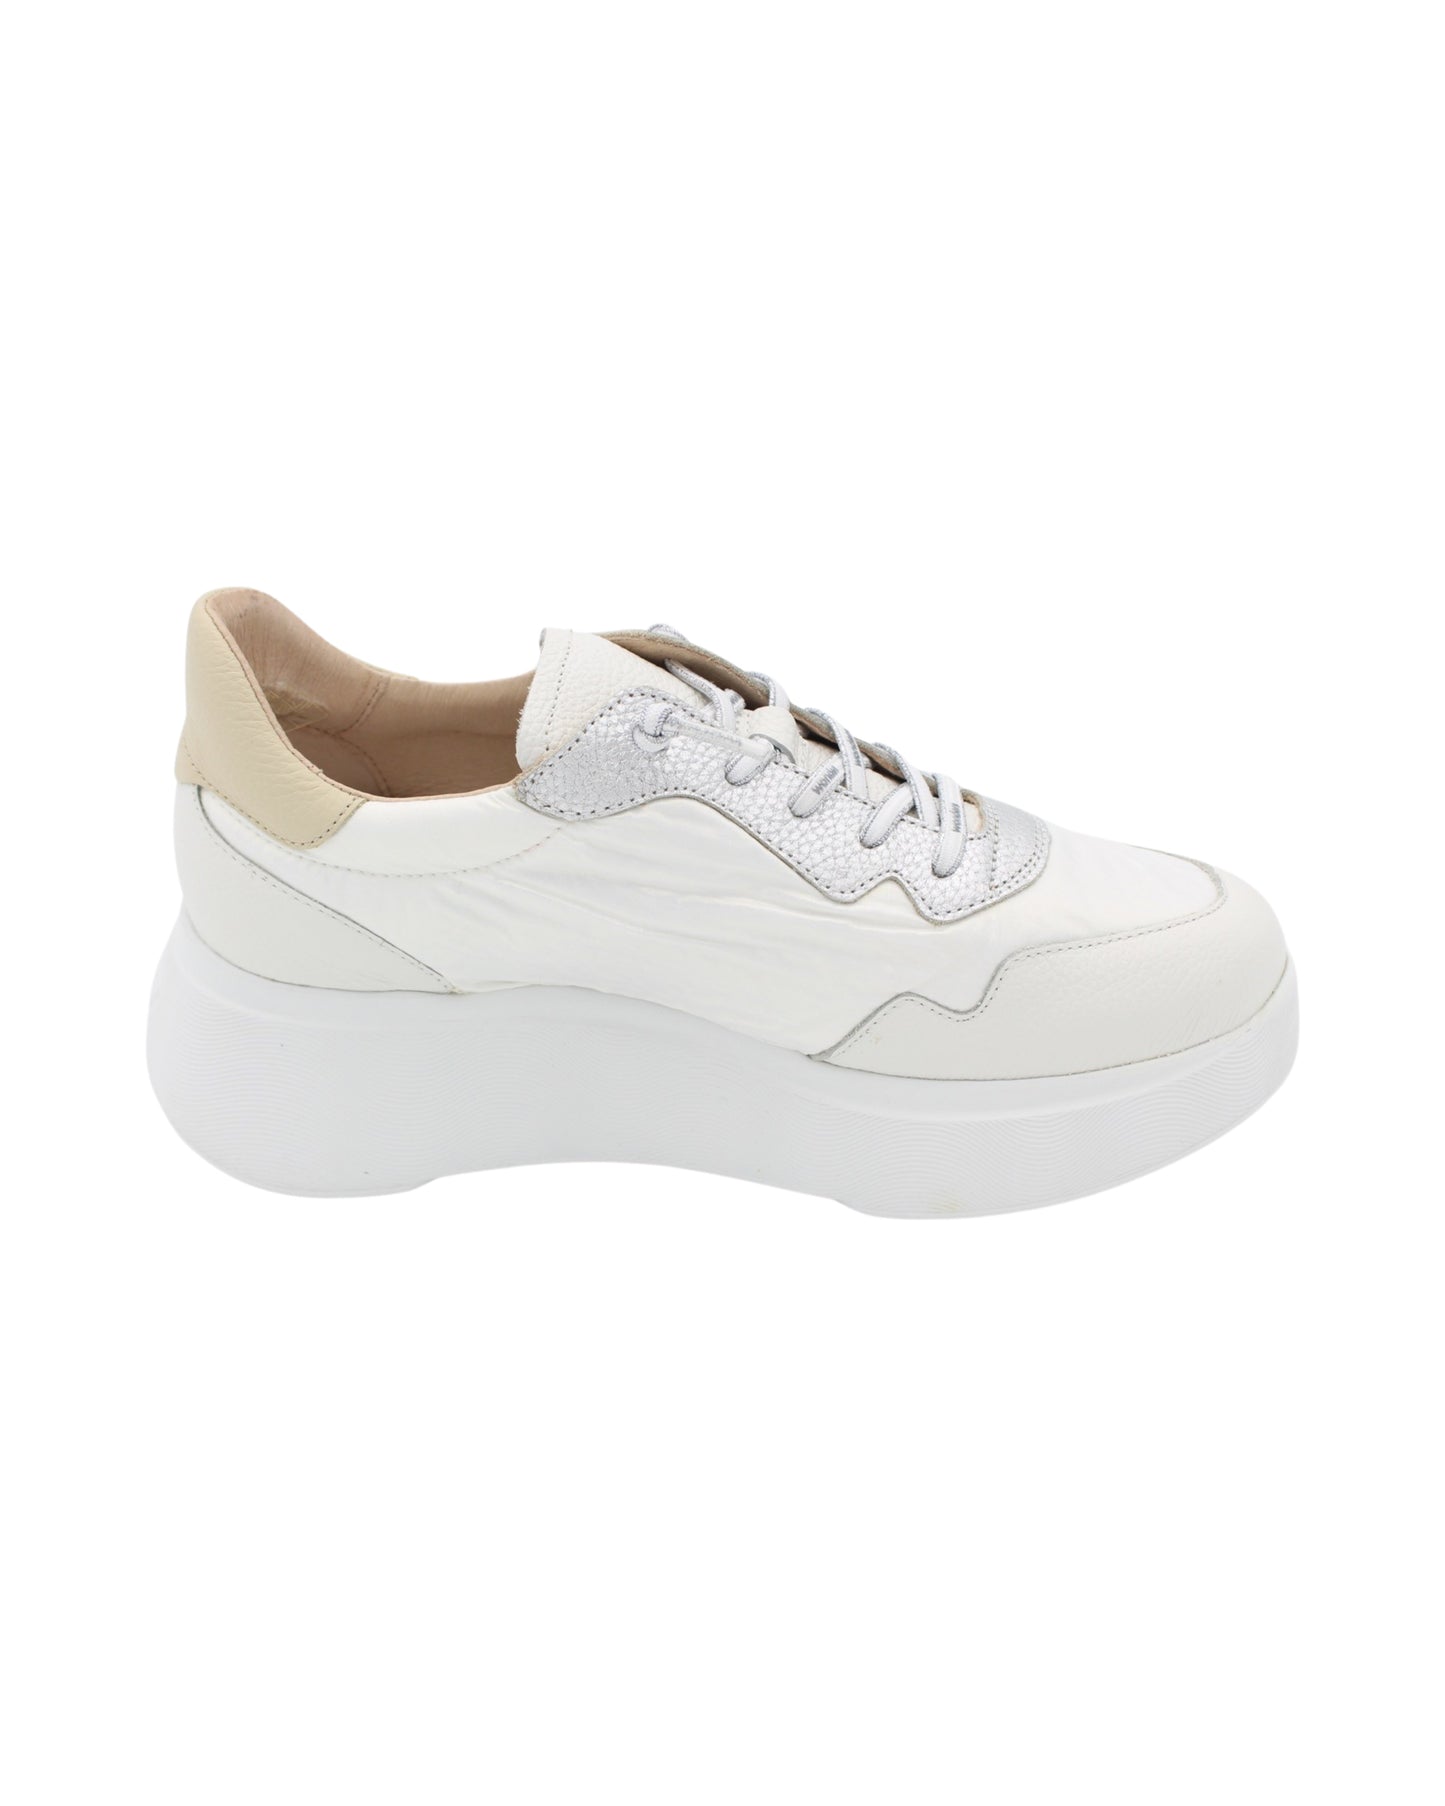 Wonders - Ladies Shoes Trainers White, Silver (2003)